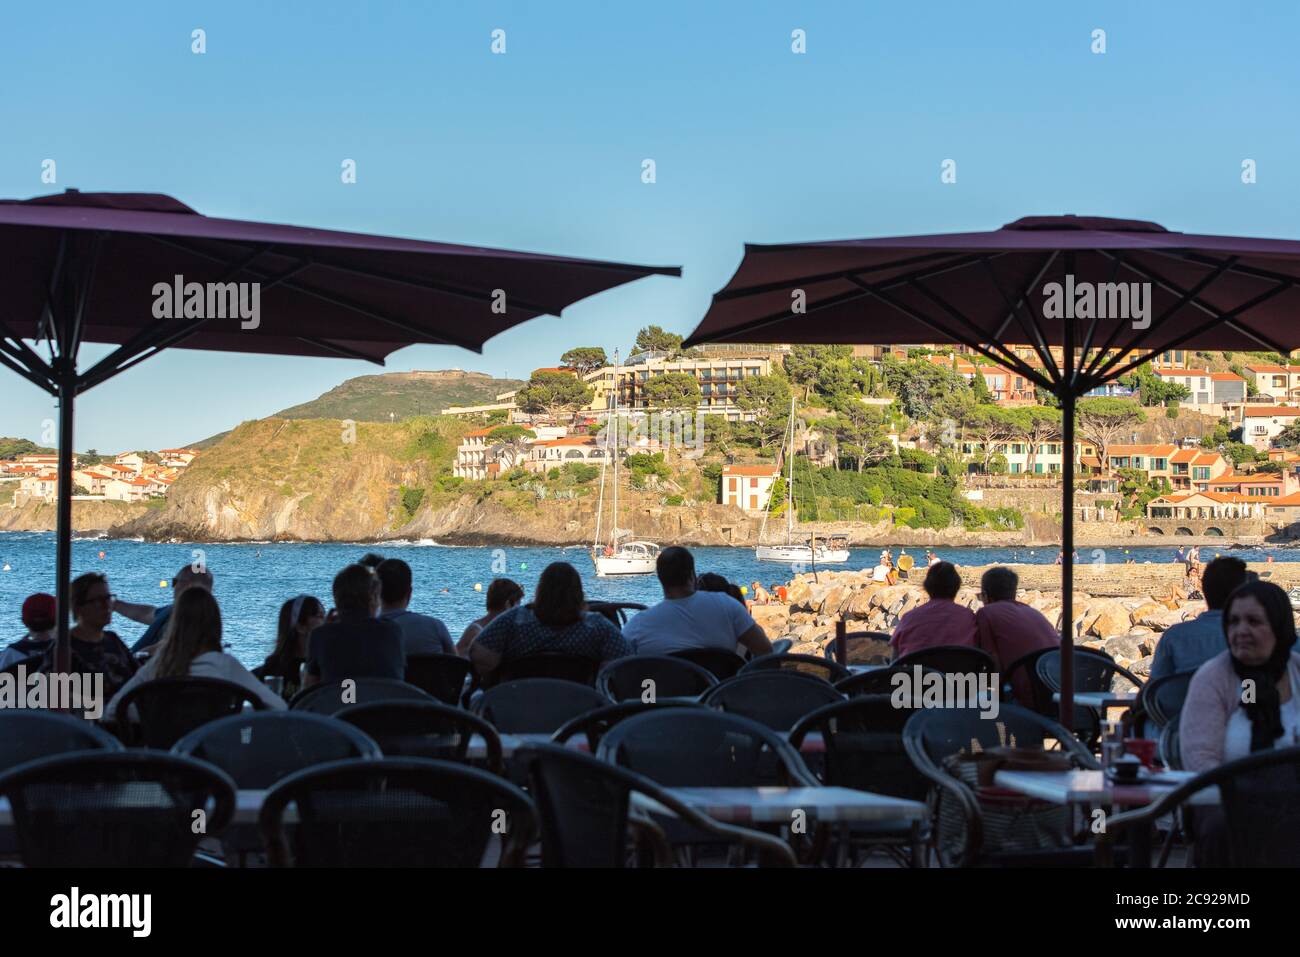 COLLIUORE, FRANCE - Jun 30, 2020: Coliure, France :  2020 june 22 :  Restaurant in Old town of Collioure, France, a popular resort town on Mediterrane Stock Photo